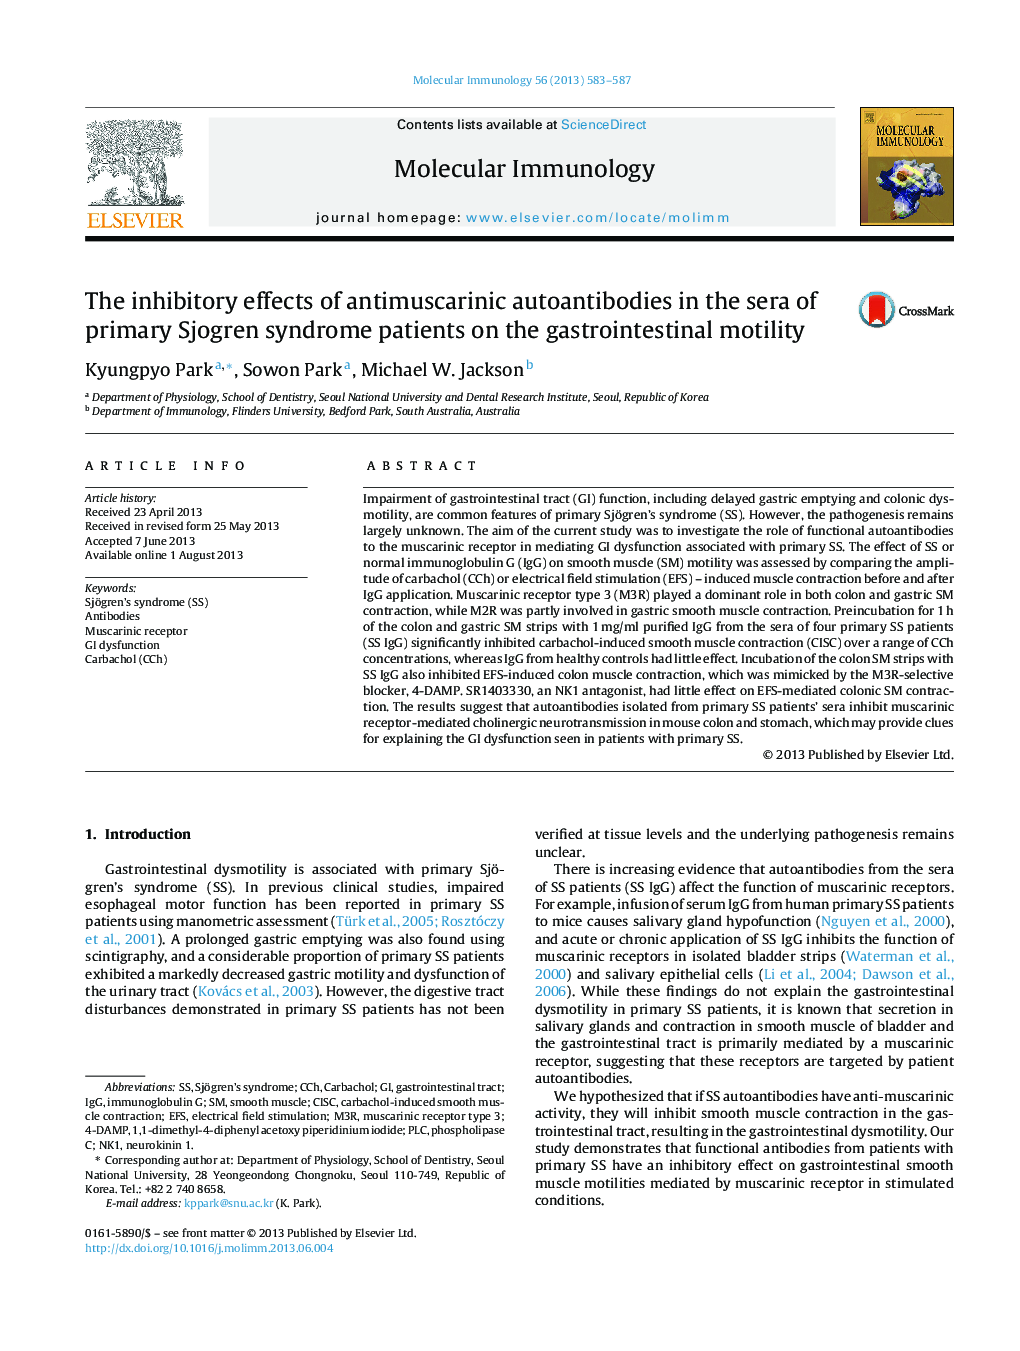 The inhibitory effects of antimuscarinic autoantibodies in the sera of primary Sjogren syndrome patients on the gastrointestinal motility